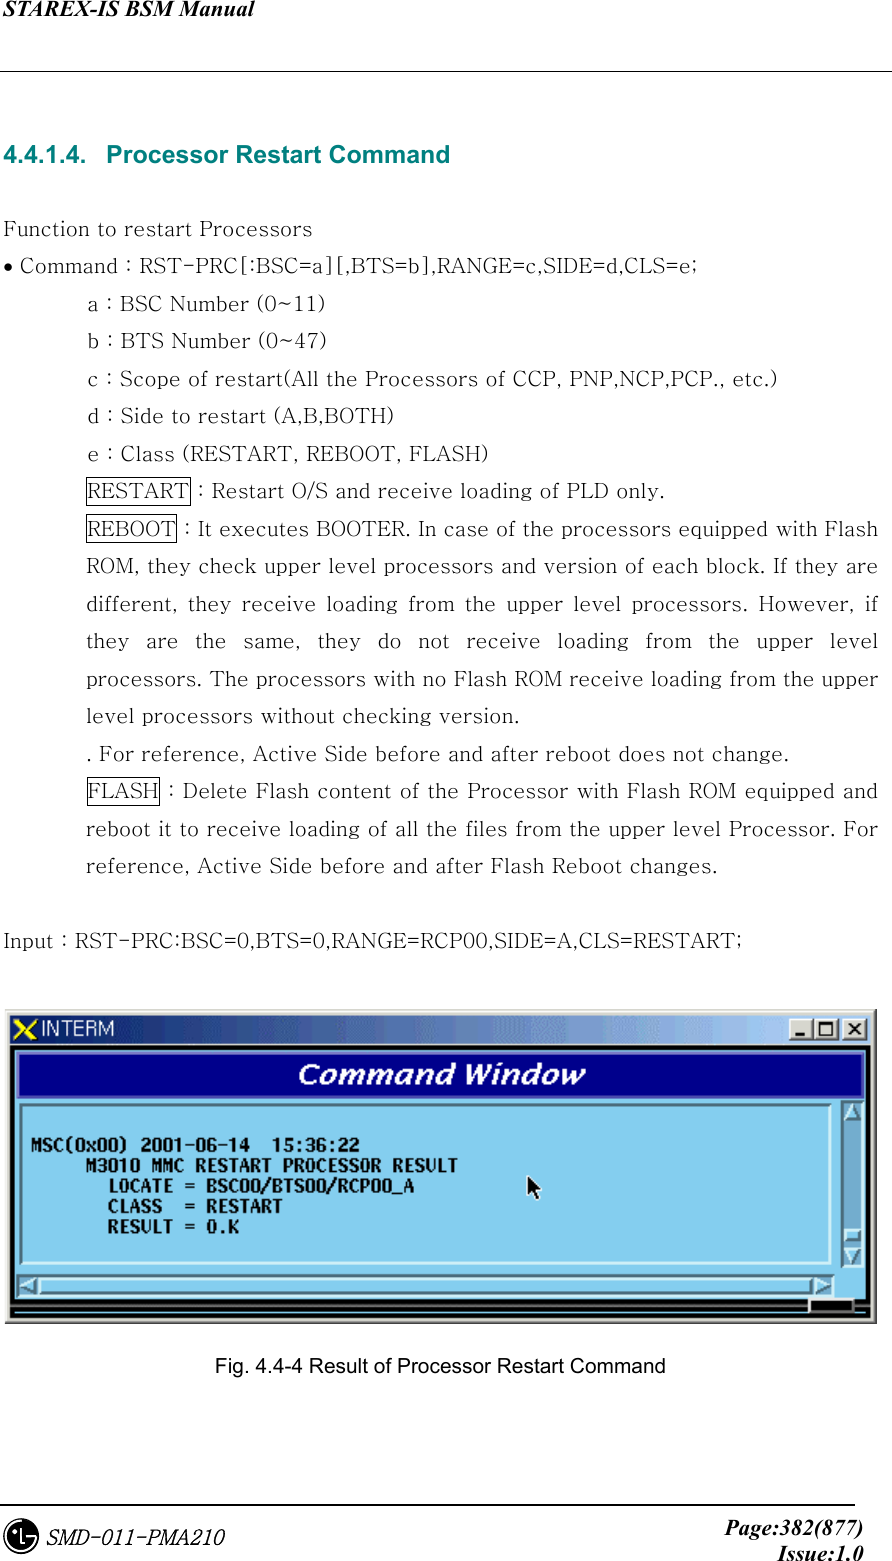 STAREX-IS BSM Manual     Page:382(877)Issue:1.0SMD-011-PMA210  4.4.1.4.   Processor Restart Command  Function to restart Processors • Command : RST-PRC[:BSC=a][,BTS=b],RANGE=c,SIDE=d,CLS=e; a : BSC Number (0~11) b : BTS Number (0~47) c : Scope of restart(All the Processors of CCP, PNP,NCP,PCP., etc.) d : Side to restart (A,B,BOTH) e : Class (RESTART, REBOOT, FLASH) RESTART : Restart O/S and receive loading of PLD only. REBOOT : It executes BOOTER. In case of the processors equipped with Flash ROM, they check upper level processors and version of each block. If they are different,  they  receive  loading  from  the  upper  level  processors.  However,  if they are the same, they do not receive loading from the upper level processors. The processors with no Flash ROM receive loading from the upper level processors without checking version. . For reference, Active Side before and after reboot does not change.  FLASH : Delete Flash content of the Processor with Flash ROM equipped and reboot it to receive loading of all the files from the upper level Processor. For reference, Active Side before and after Flash Reboot changes.  Input : RST-PRC:BSC=0,BTS=0,RANGE=RCP00,SIDE=A,CLS=RESTART;   Fig. 4.4-4 Result of Processor Restart Command    